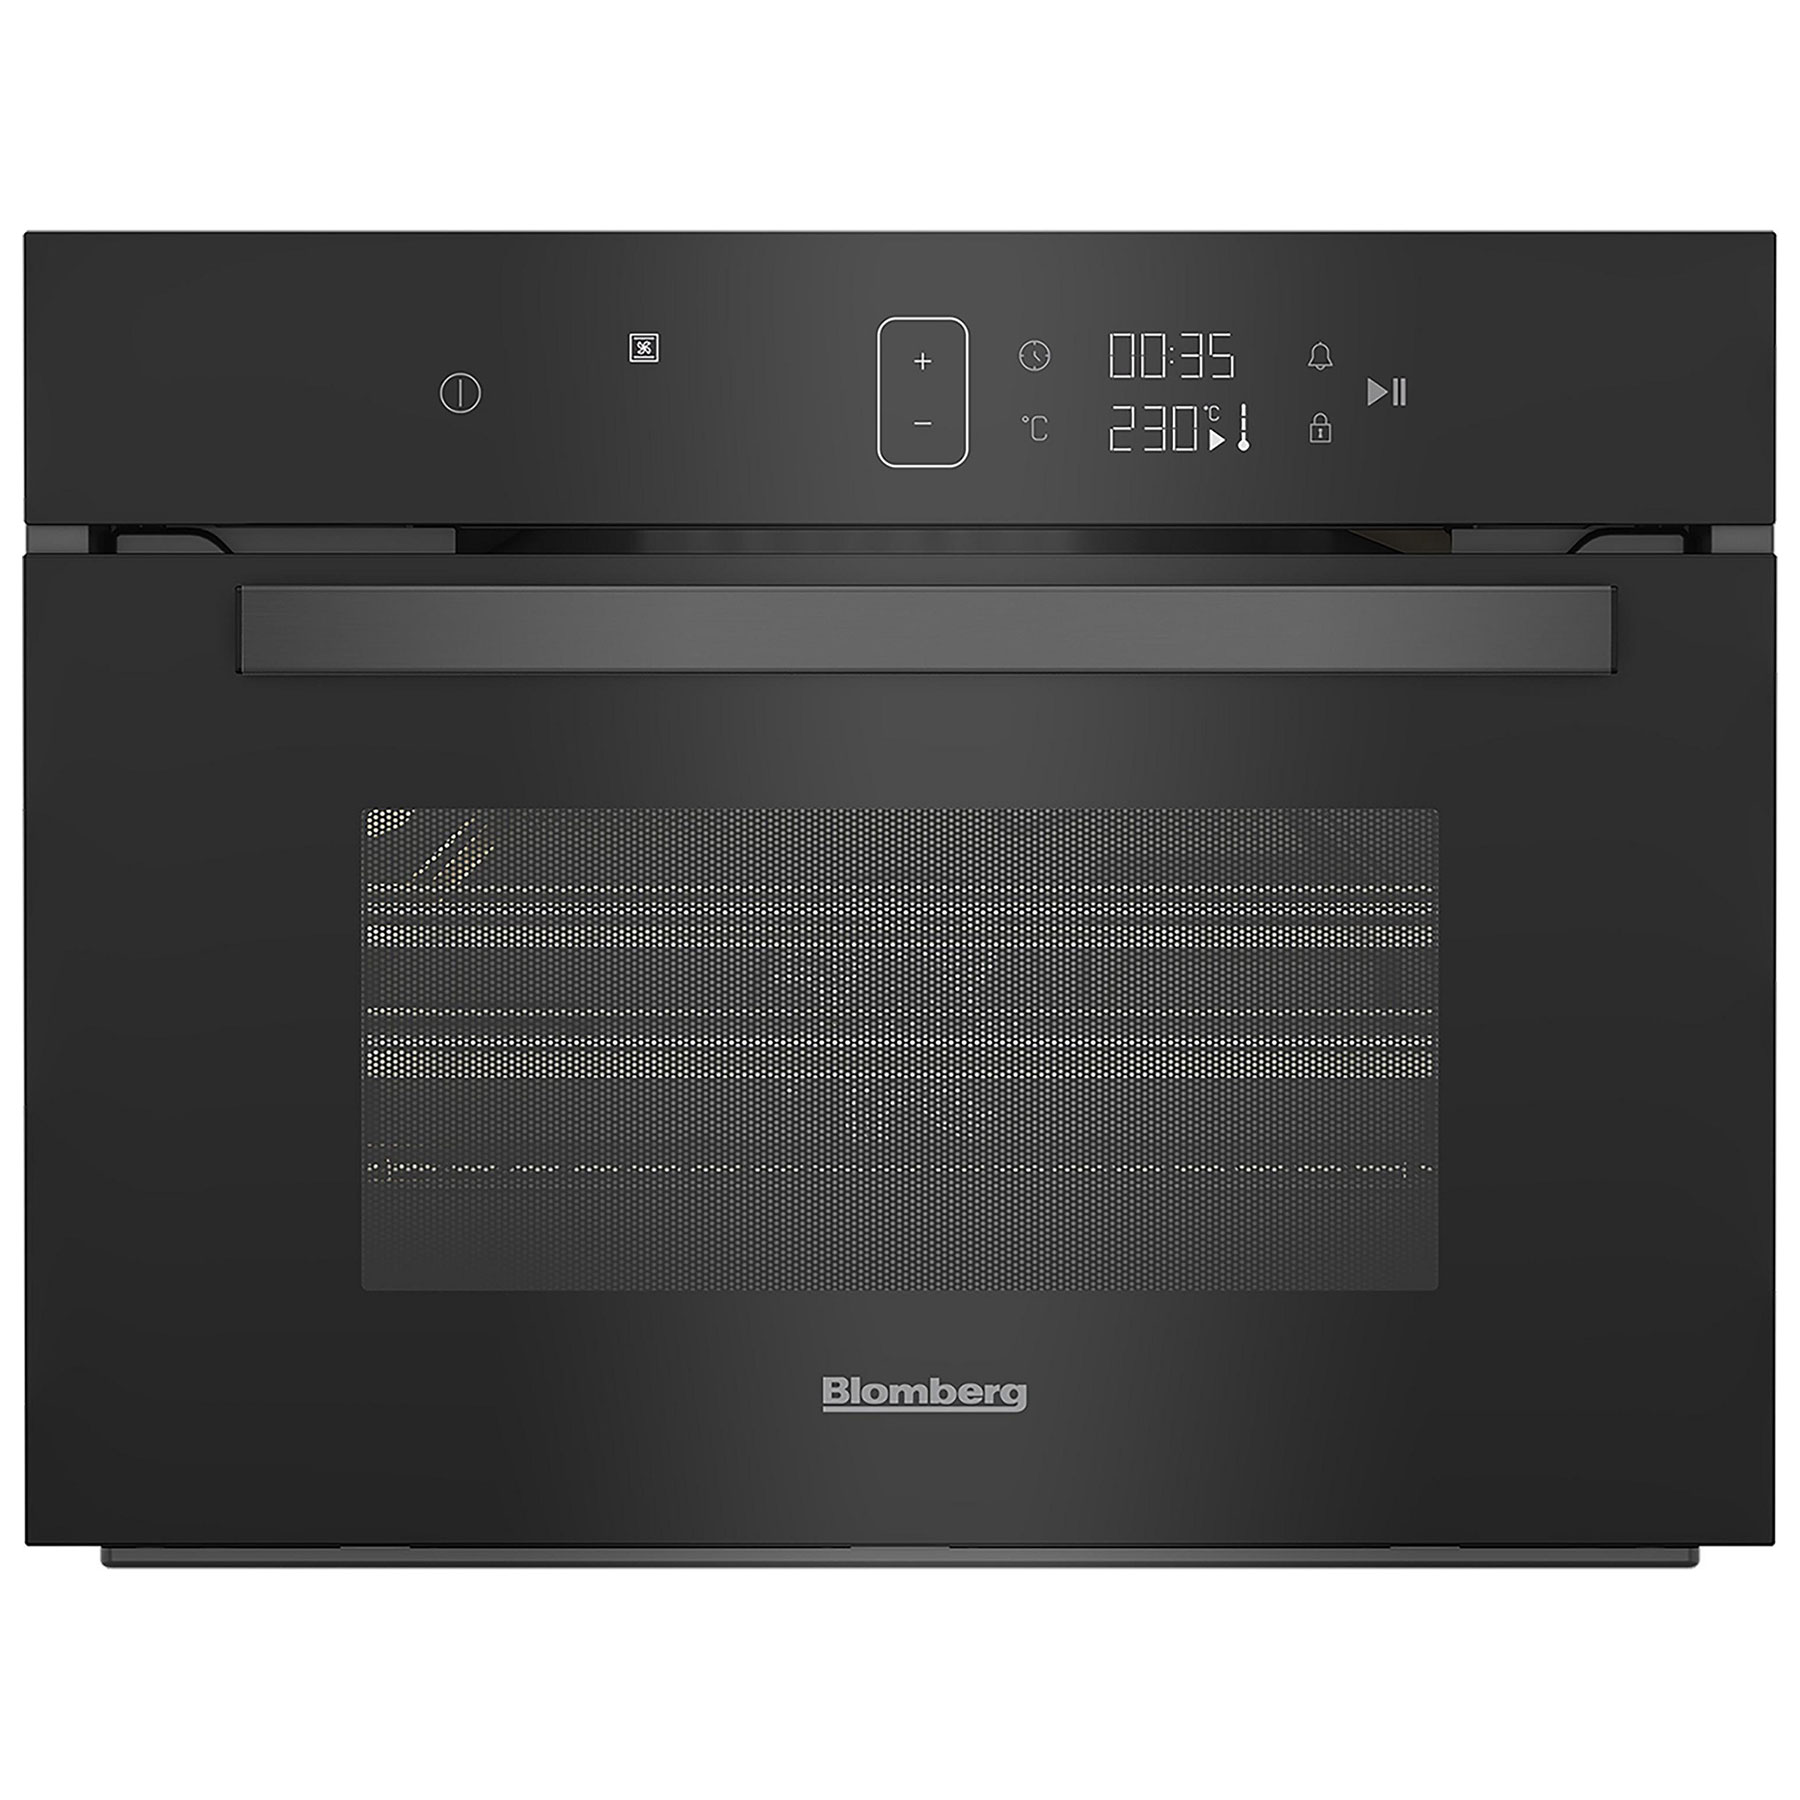 Blomberg ROKW8370B Built In Combi Microwave Oven in St Steel 800W 43L